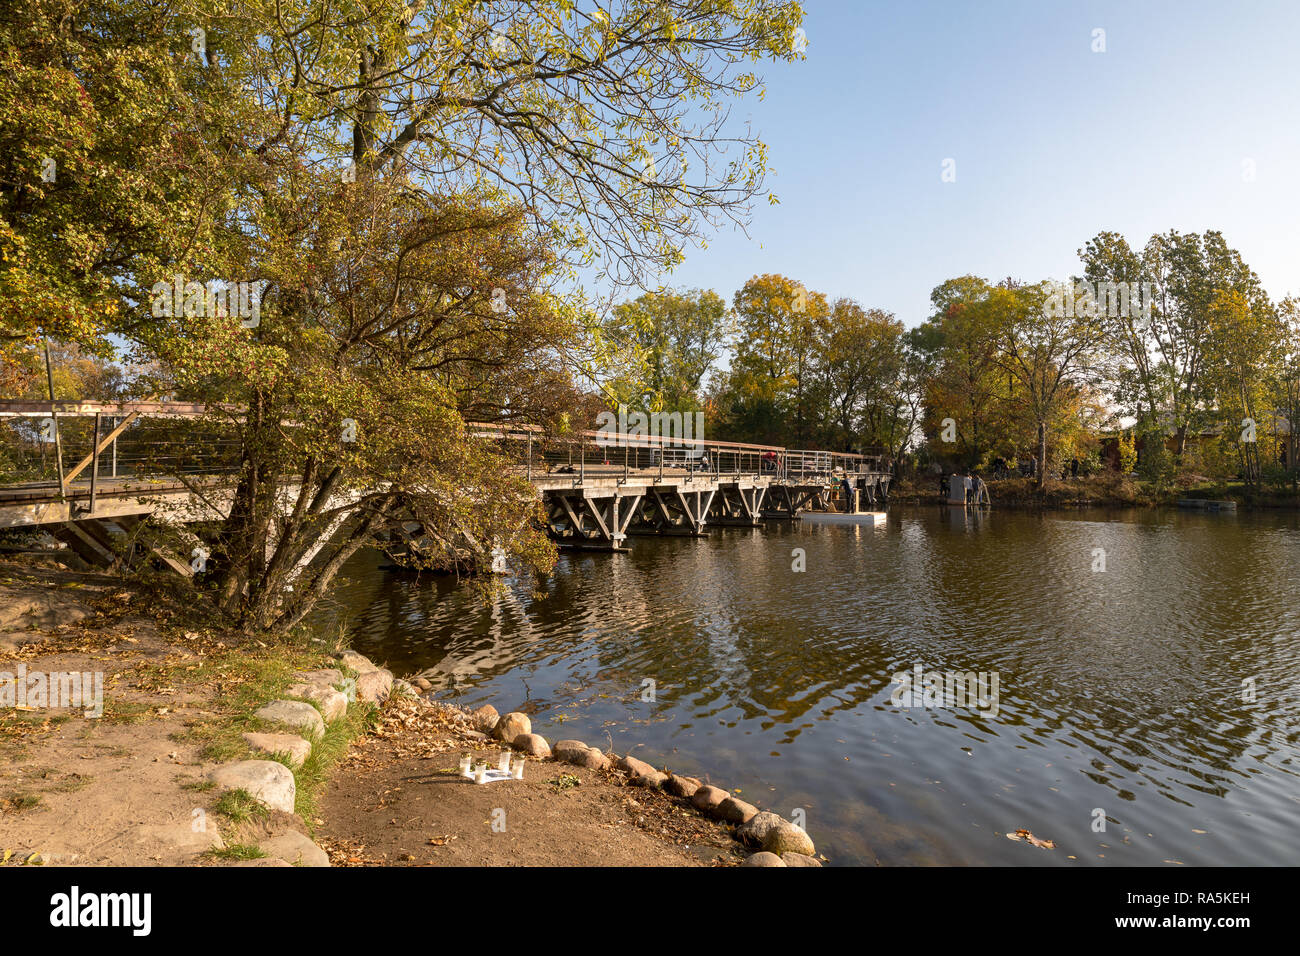 Bridge over the canal in Christiania, on a sunny autumn day in october. Stock Photo